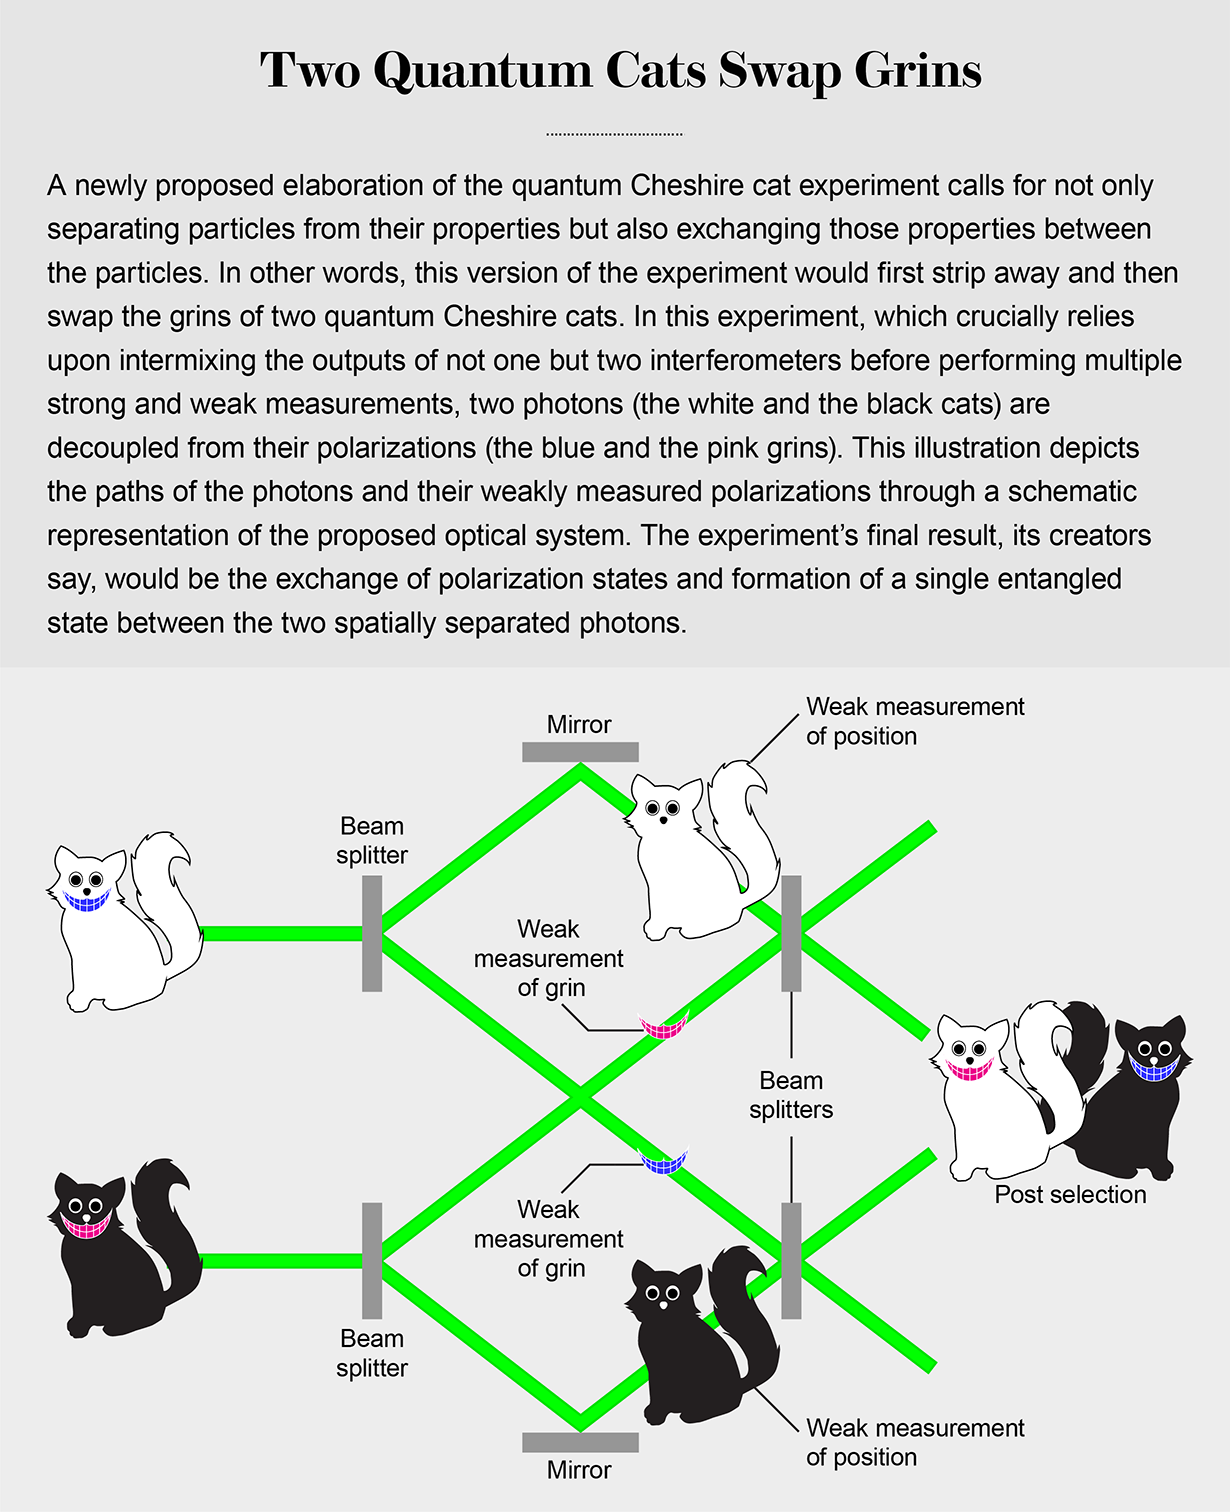 Spin Swapping Particles Could Be Quantum Cheshire Cats Scientific